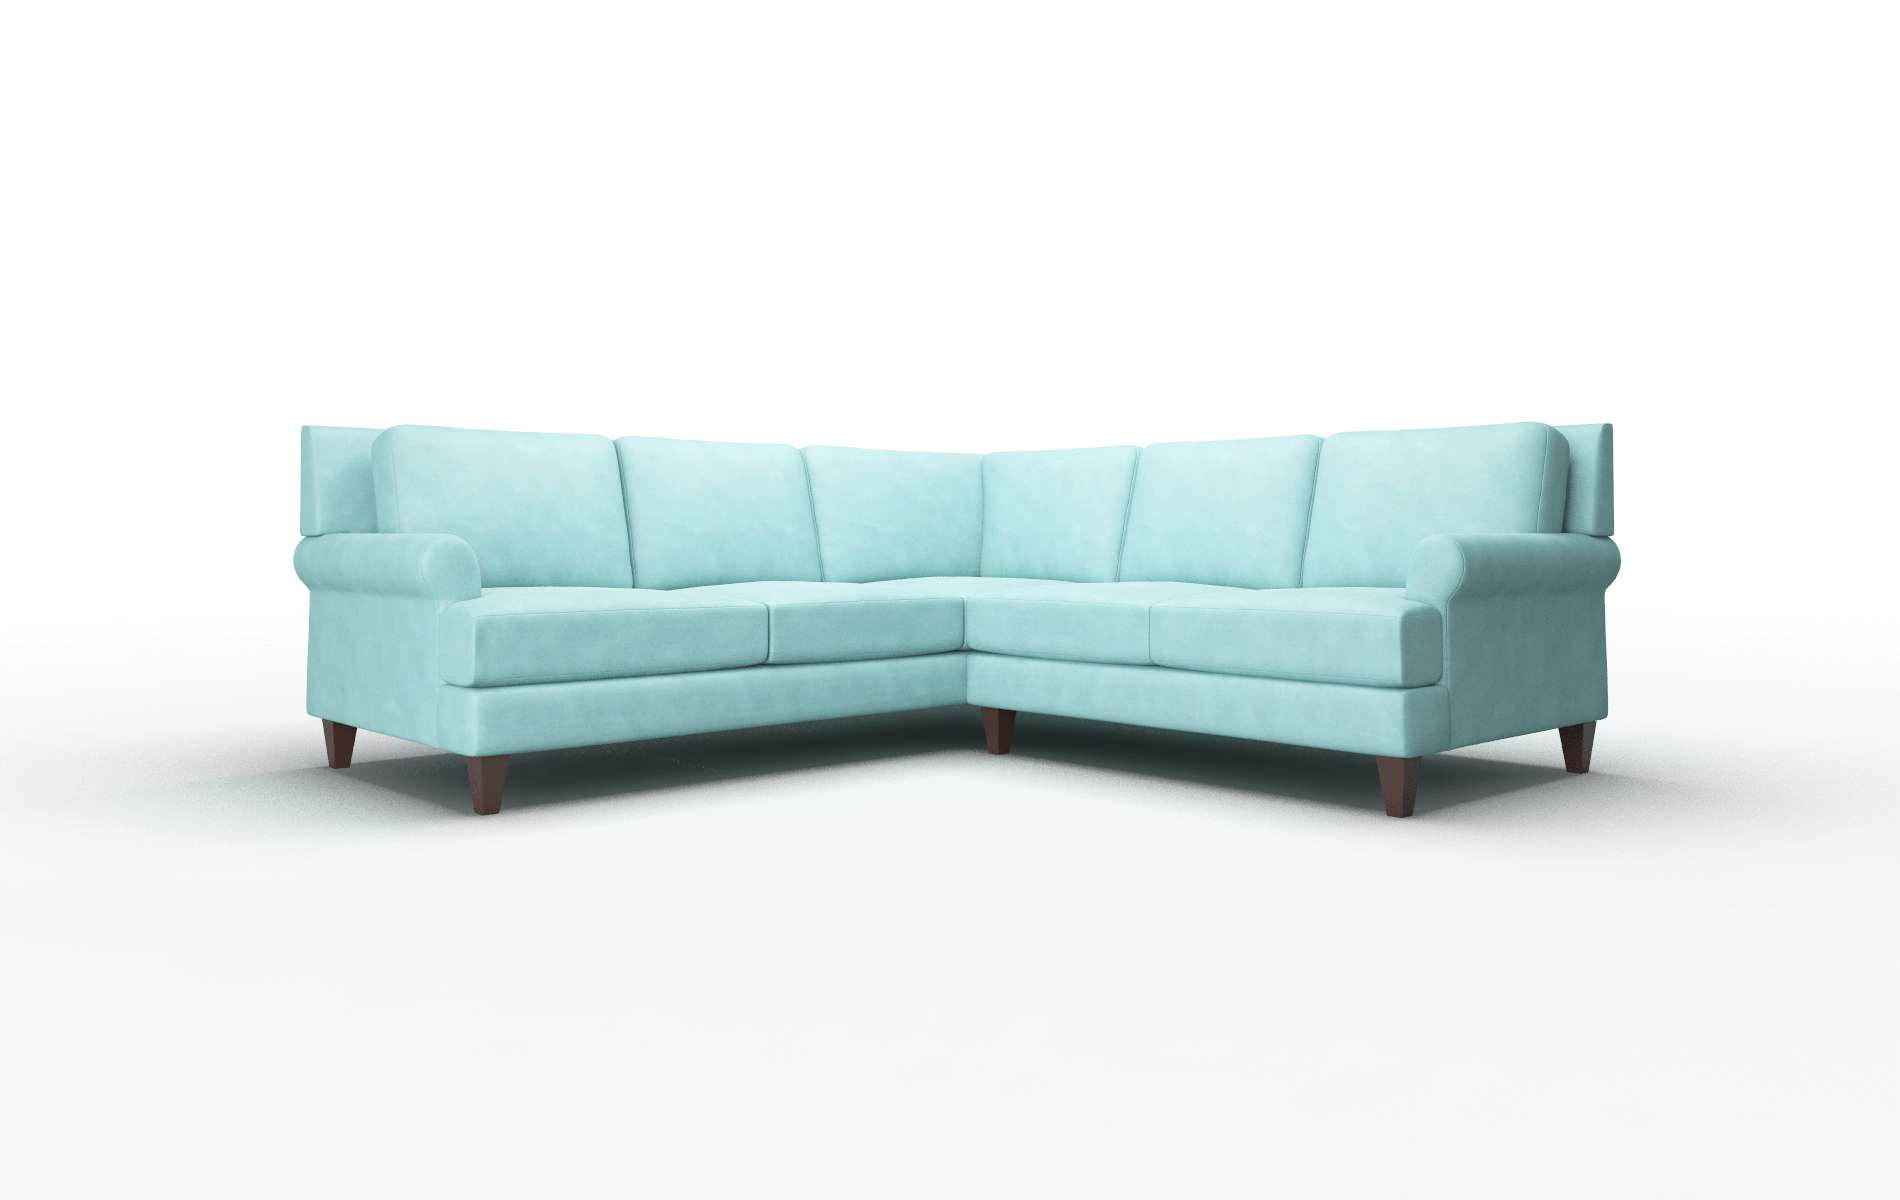 Stockholm Curious Turquoise Sectional espresso legs